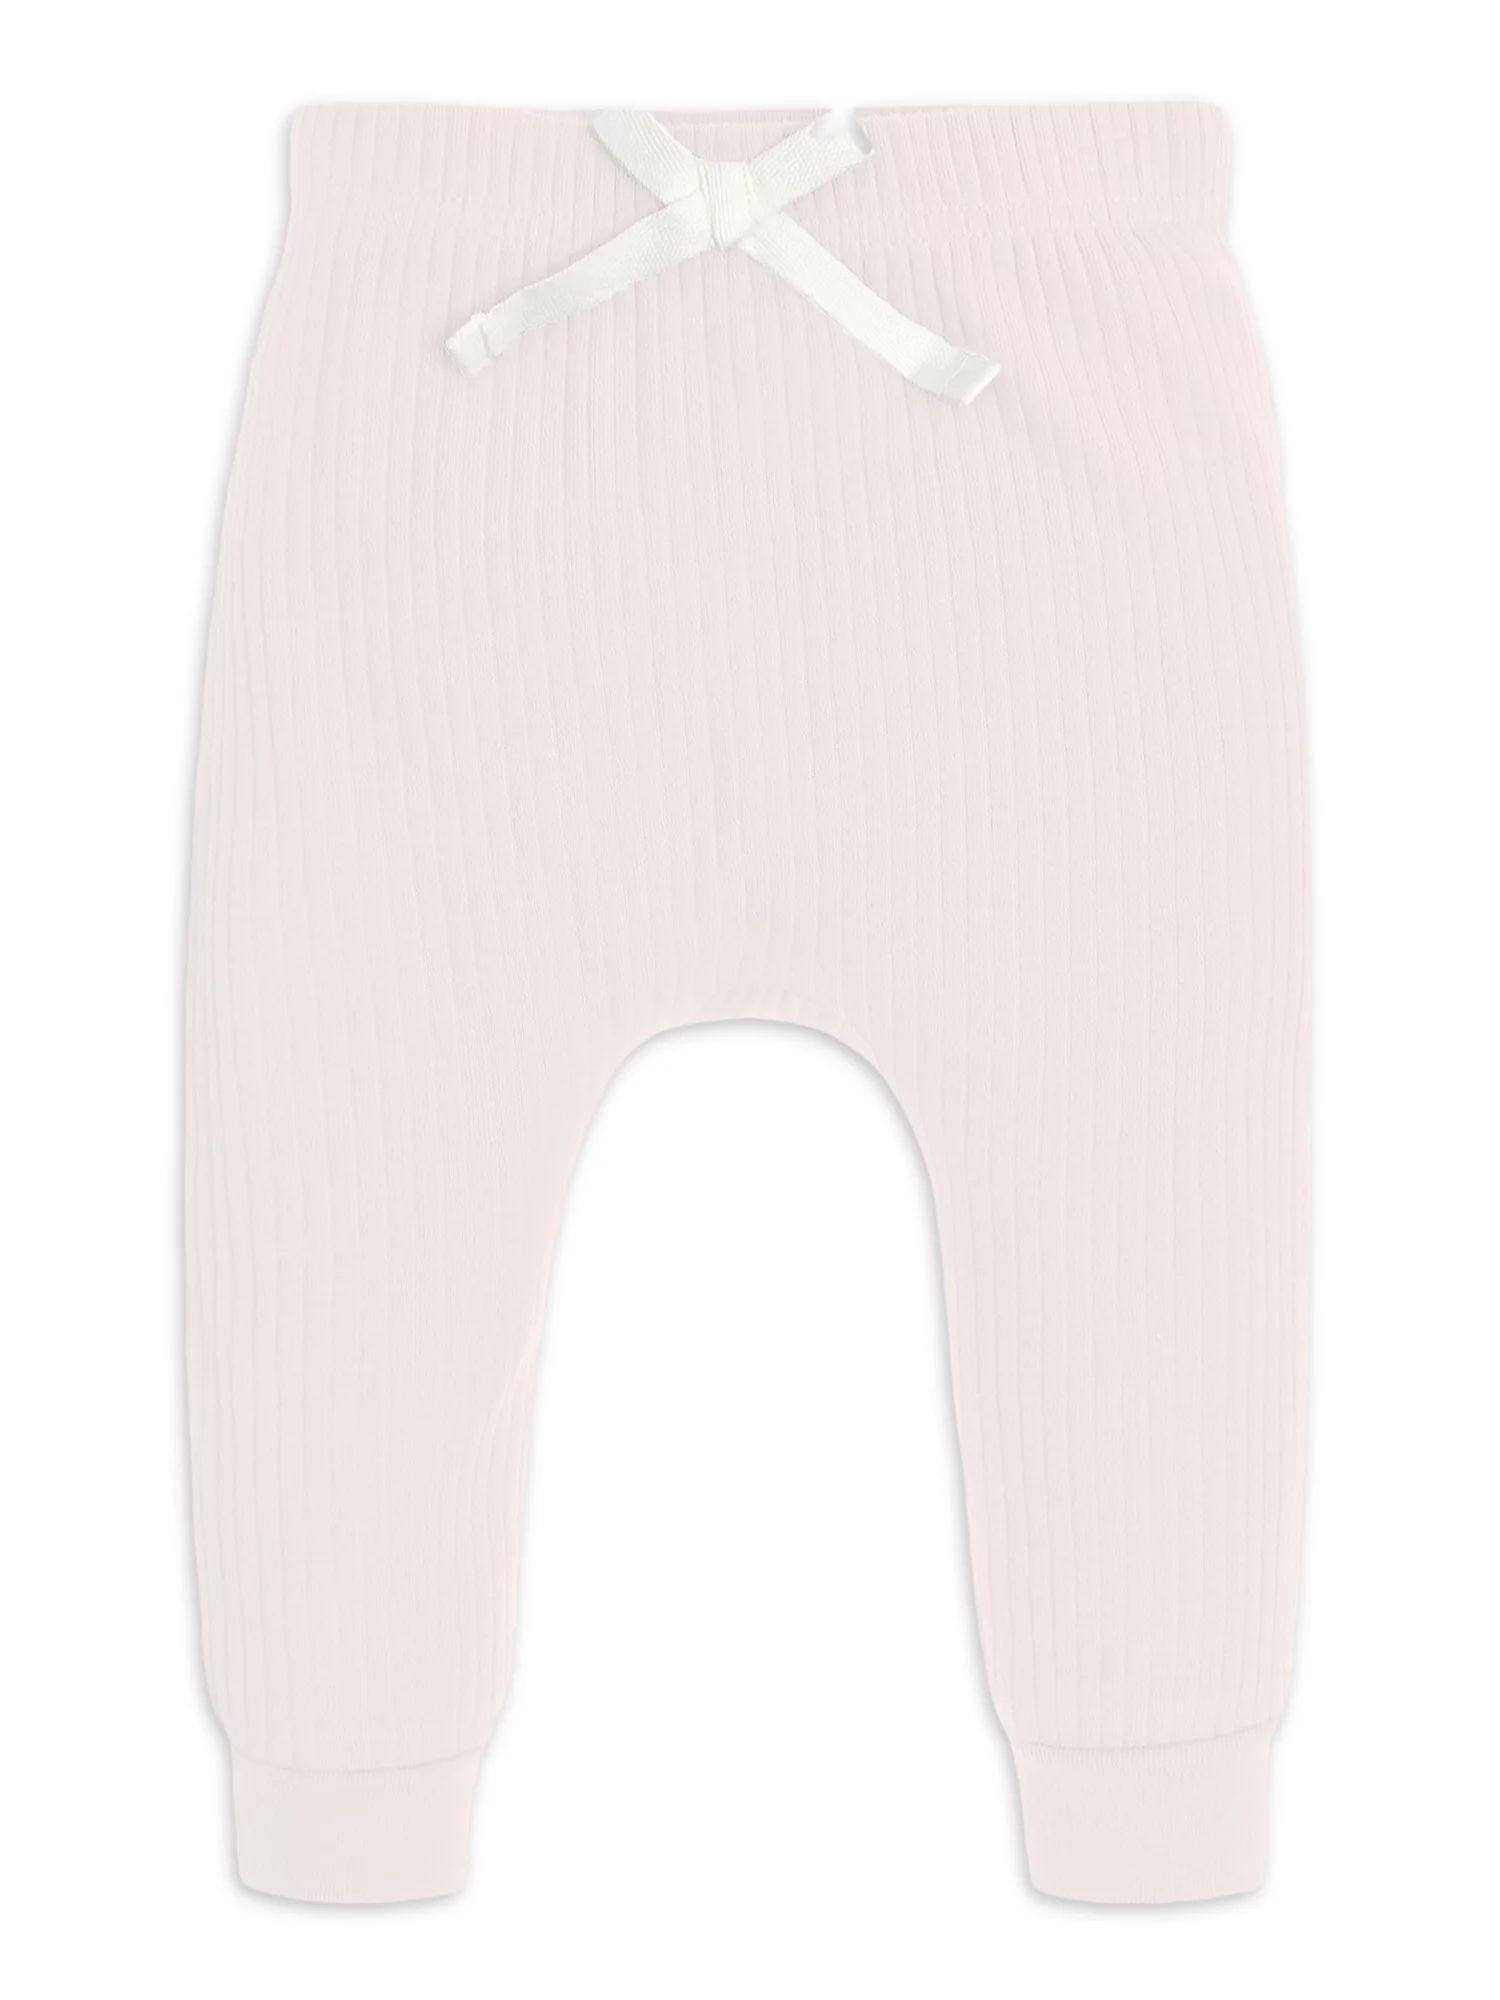 Modern Moments Baby Girls Jogger Pant Pink, 1-Pack, Sizes 0-12 Months | Walmart (US)